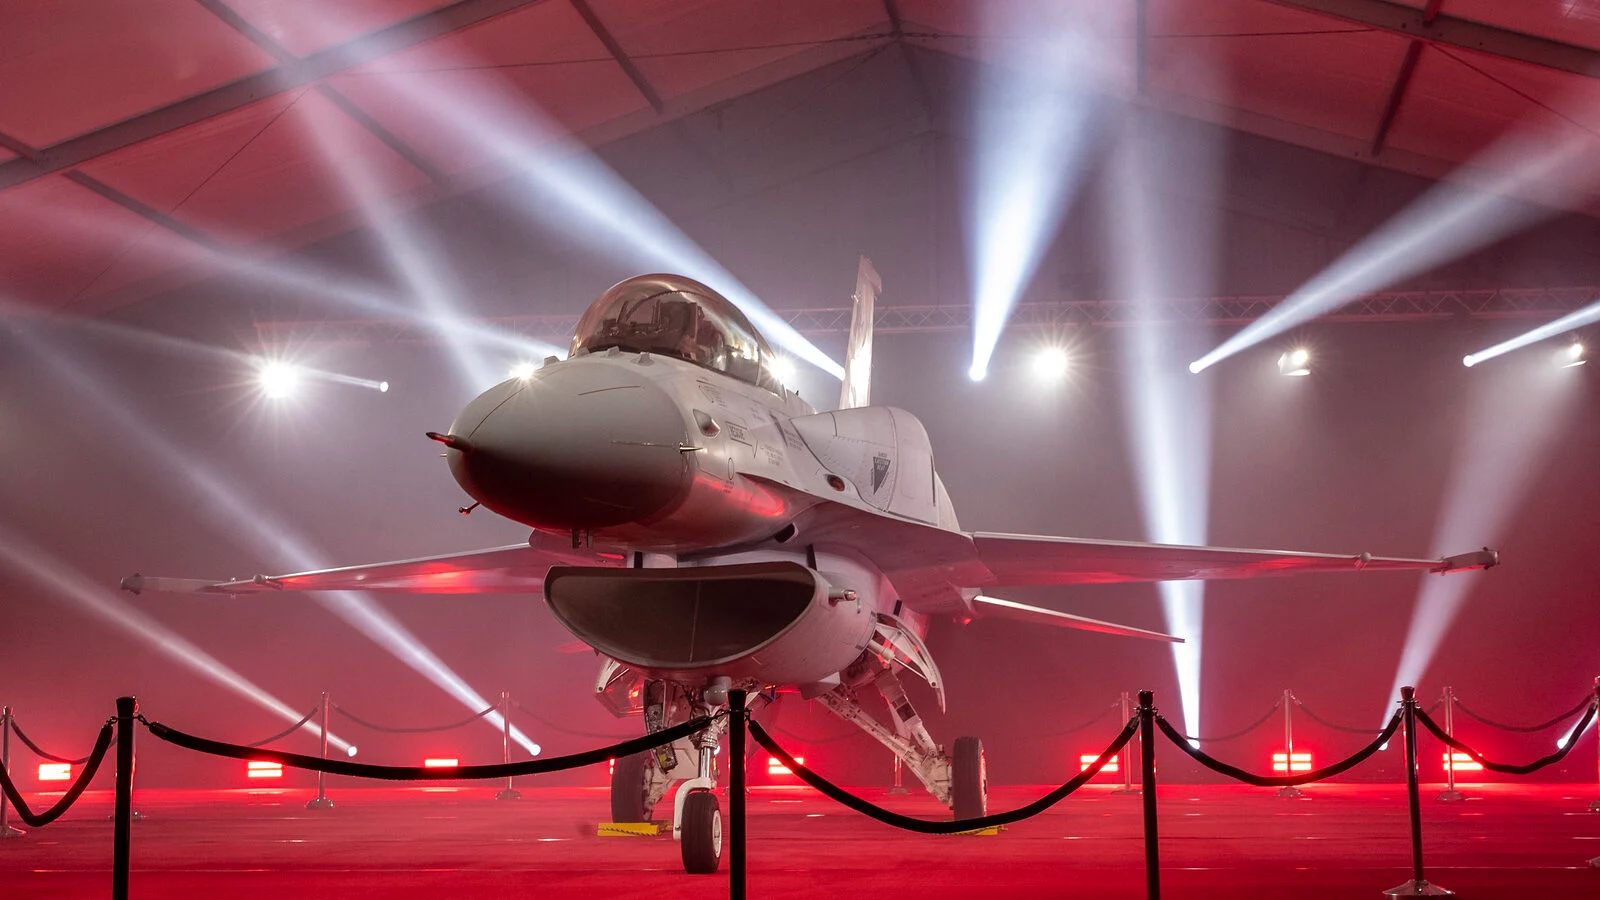 Lockheed Martin delivers first F-16 Block 70 fighter jet to Bahrain